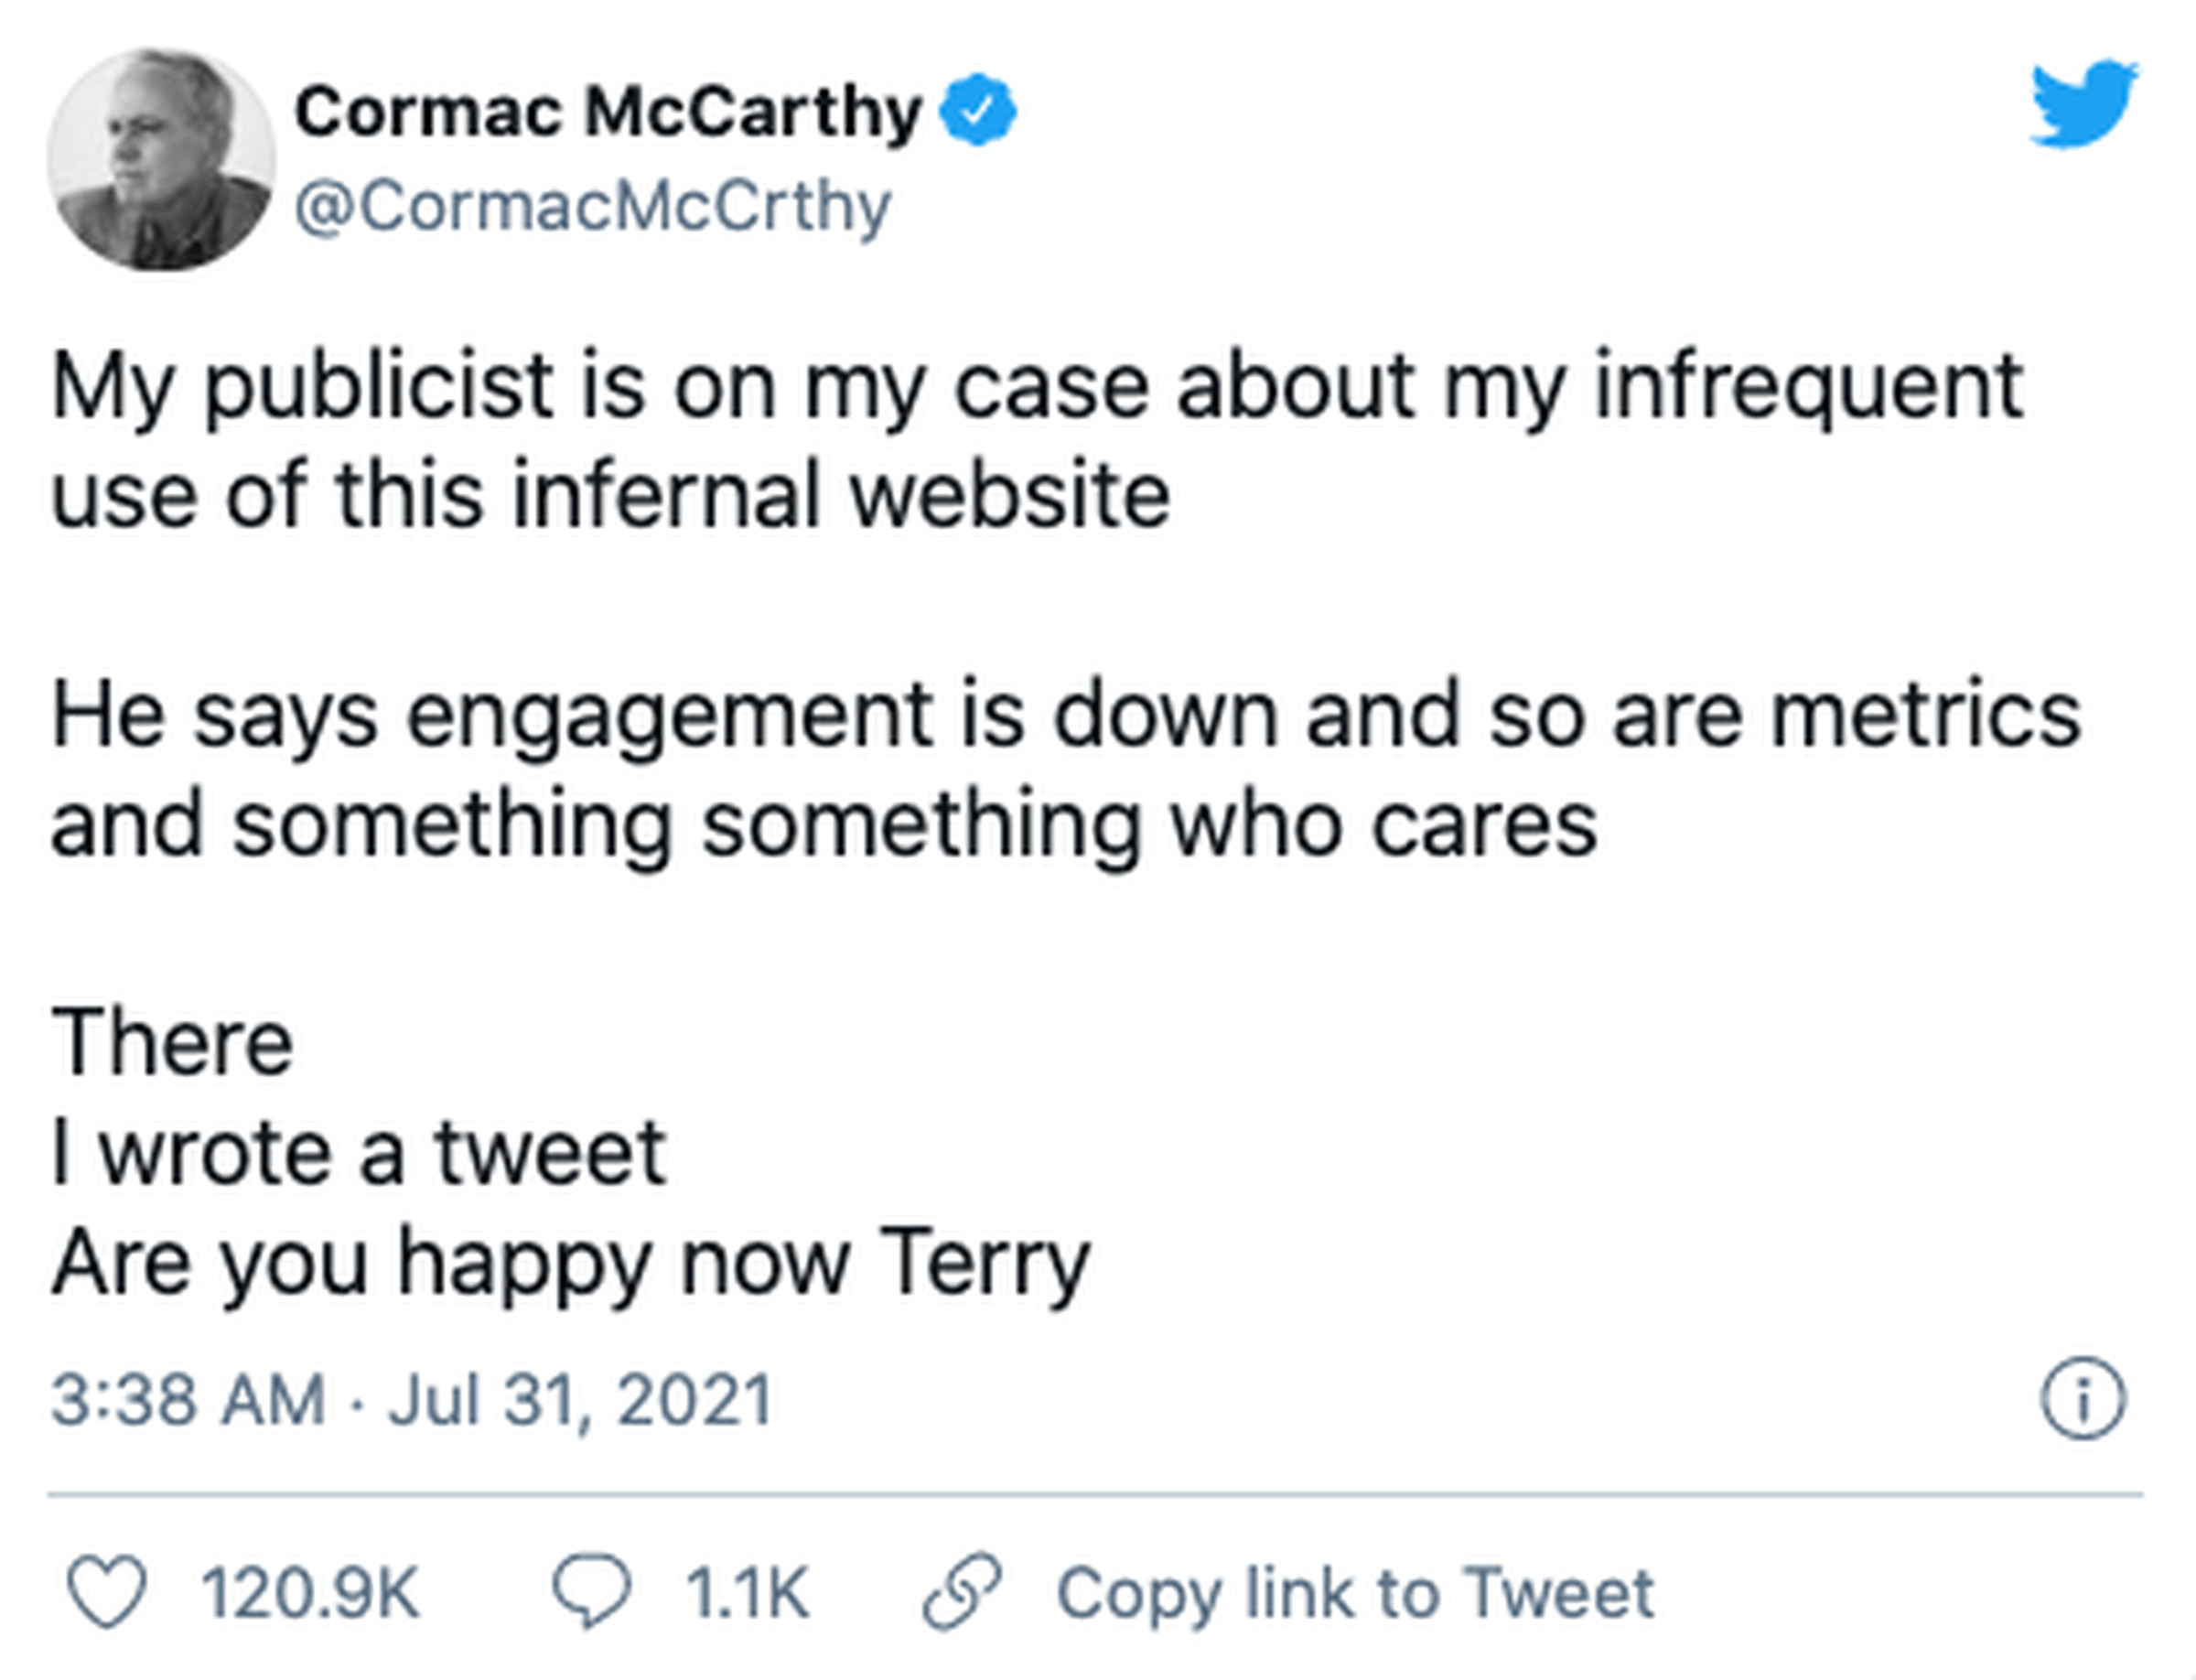 A tweet from the Cormac McCarthy account when it was verified earlier today. 